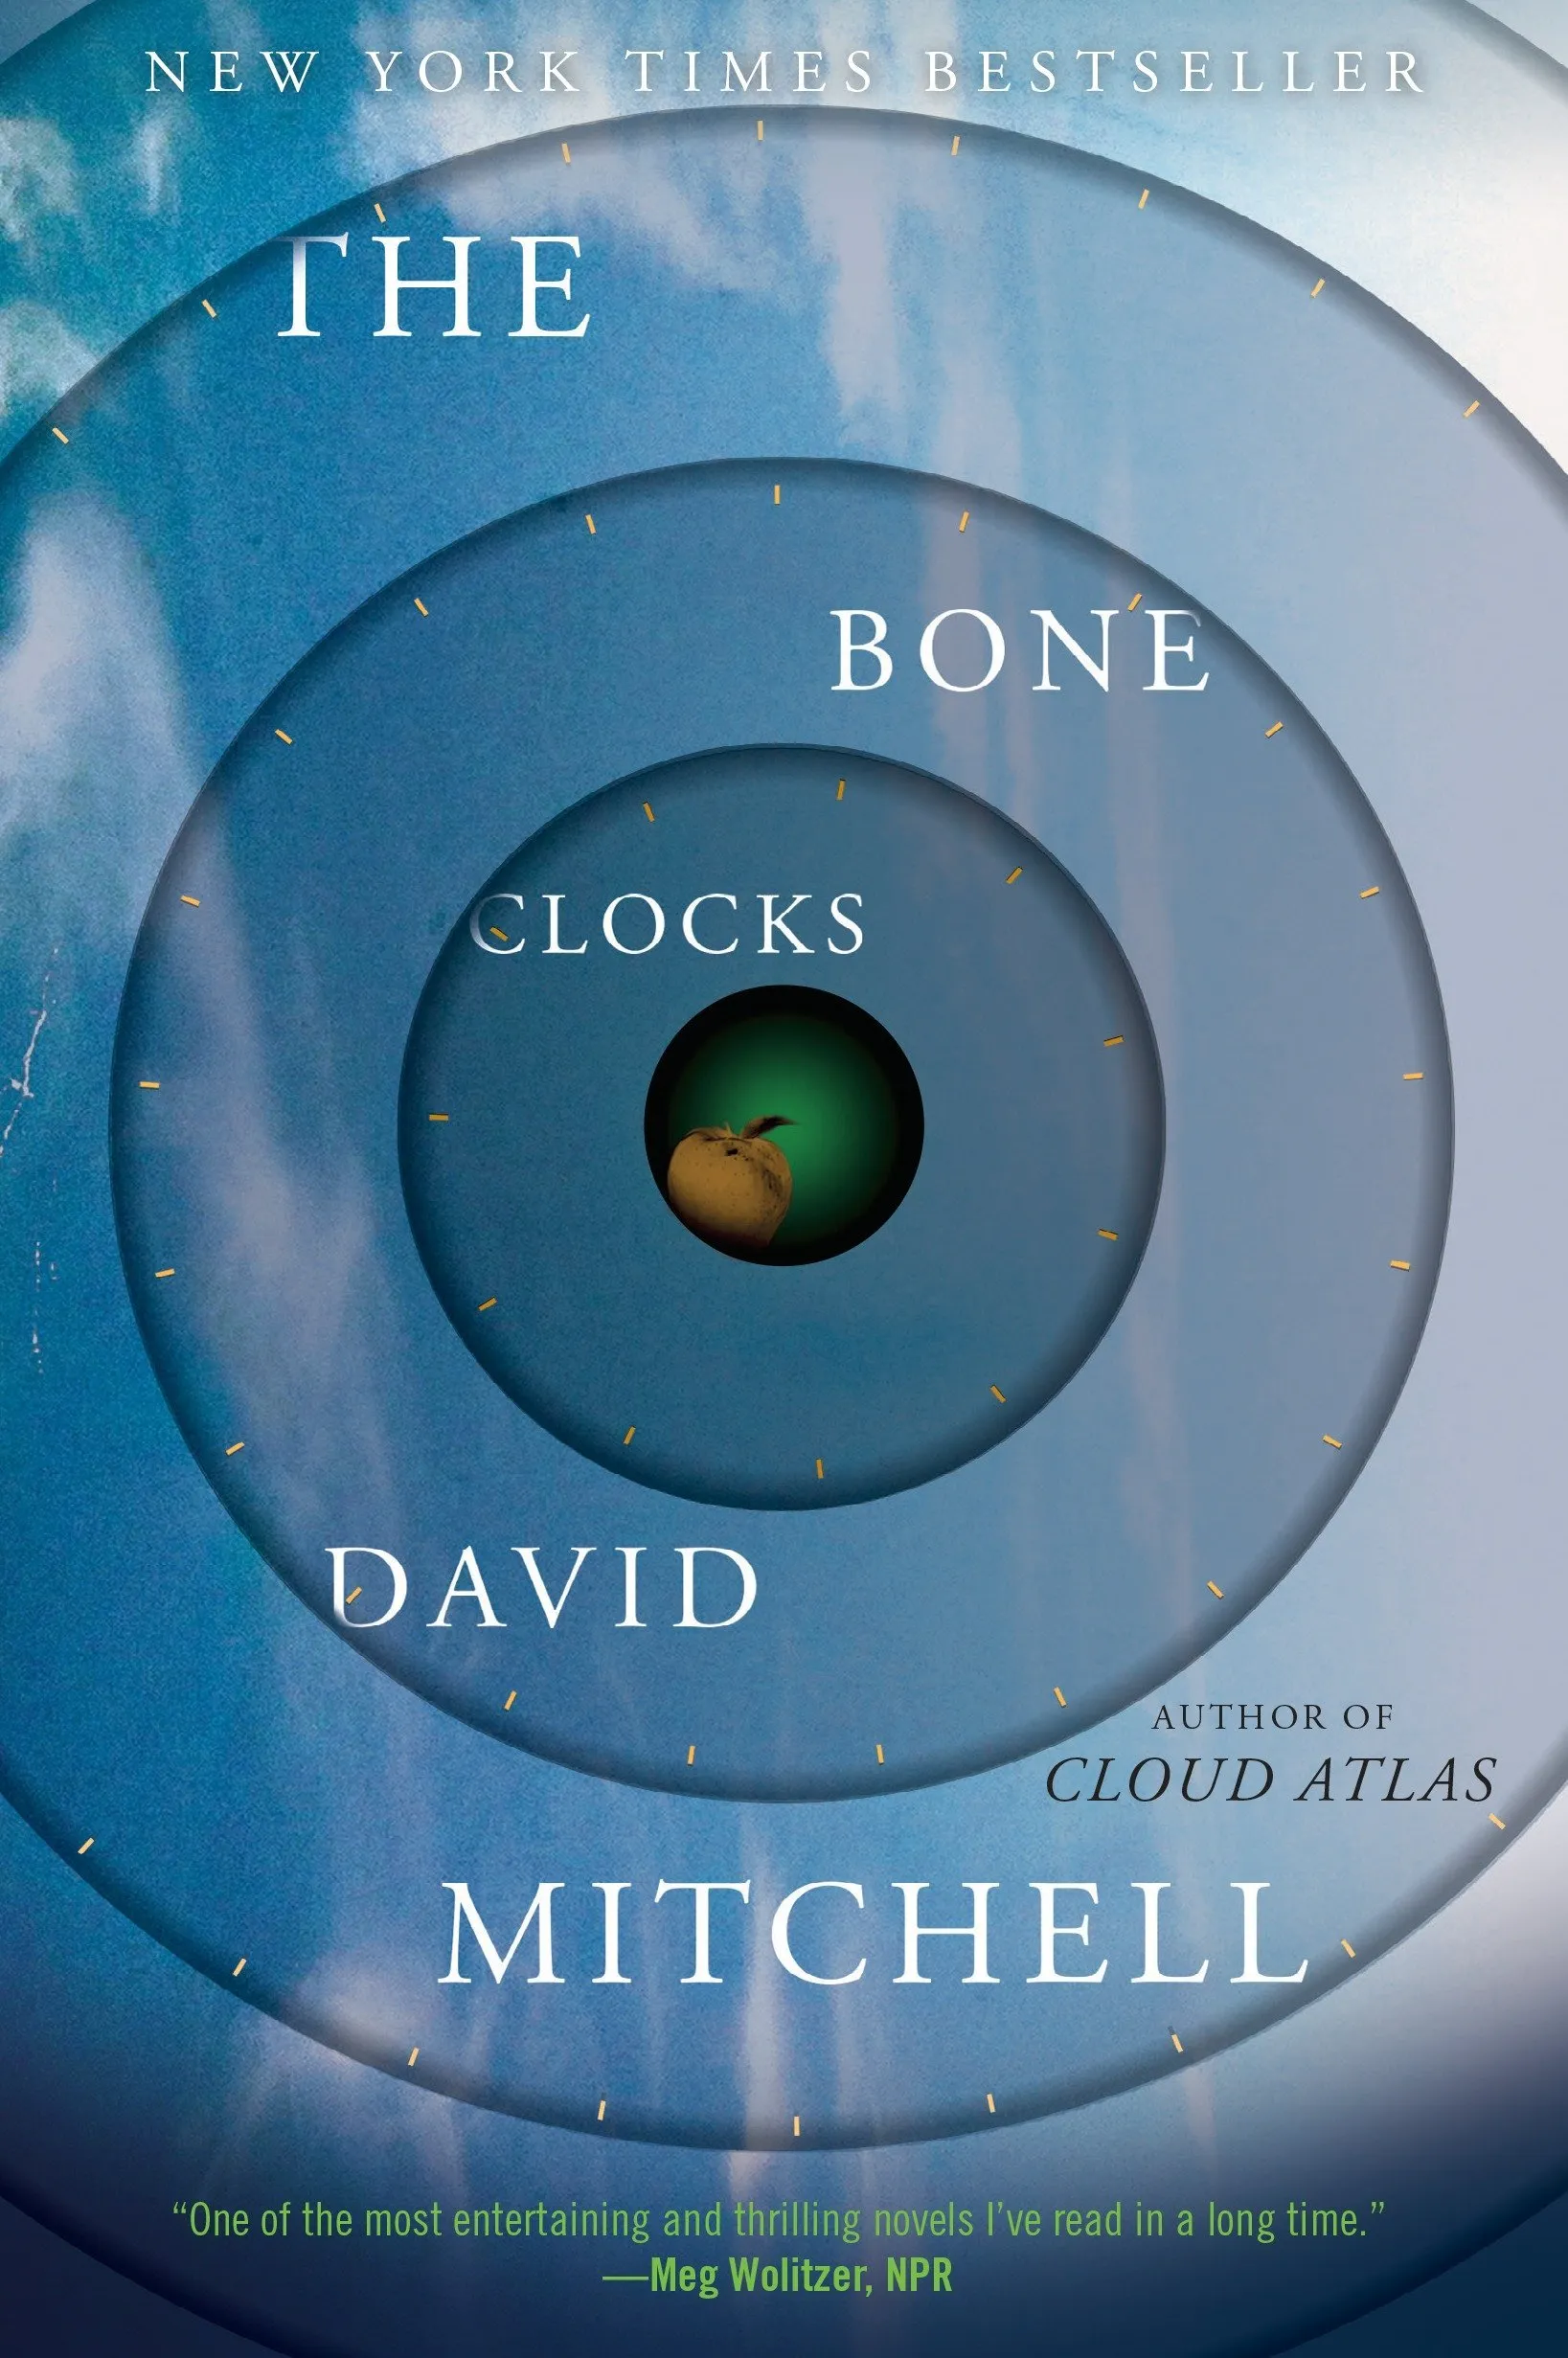 A graphic of the cover of The Bone Clocks by David Mitchell